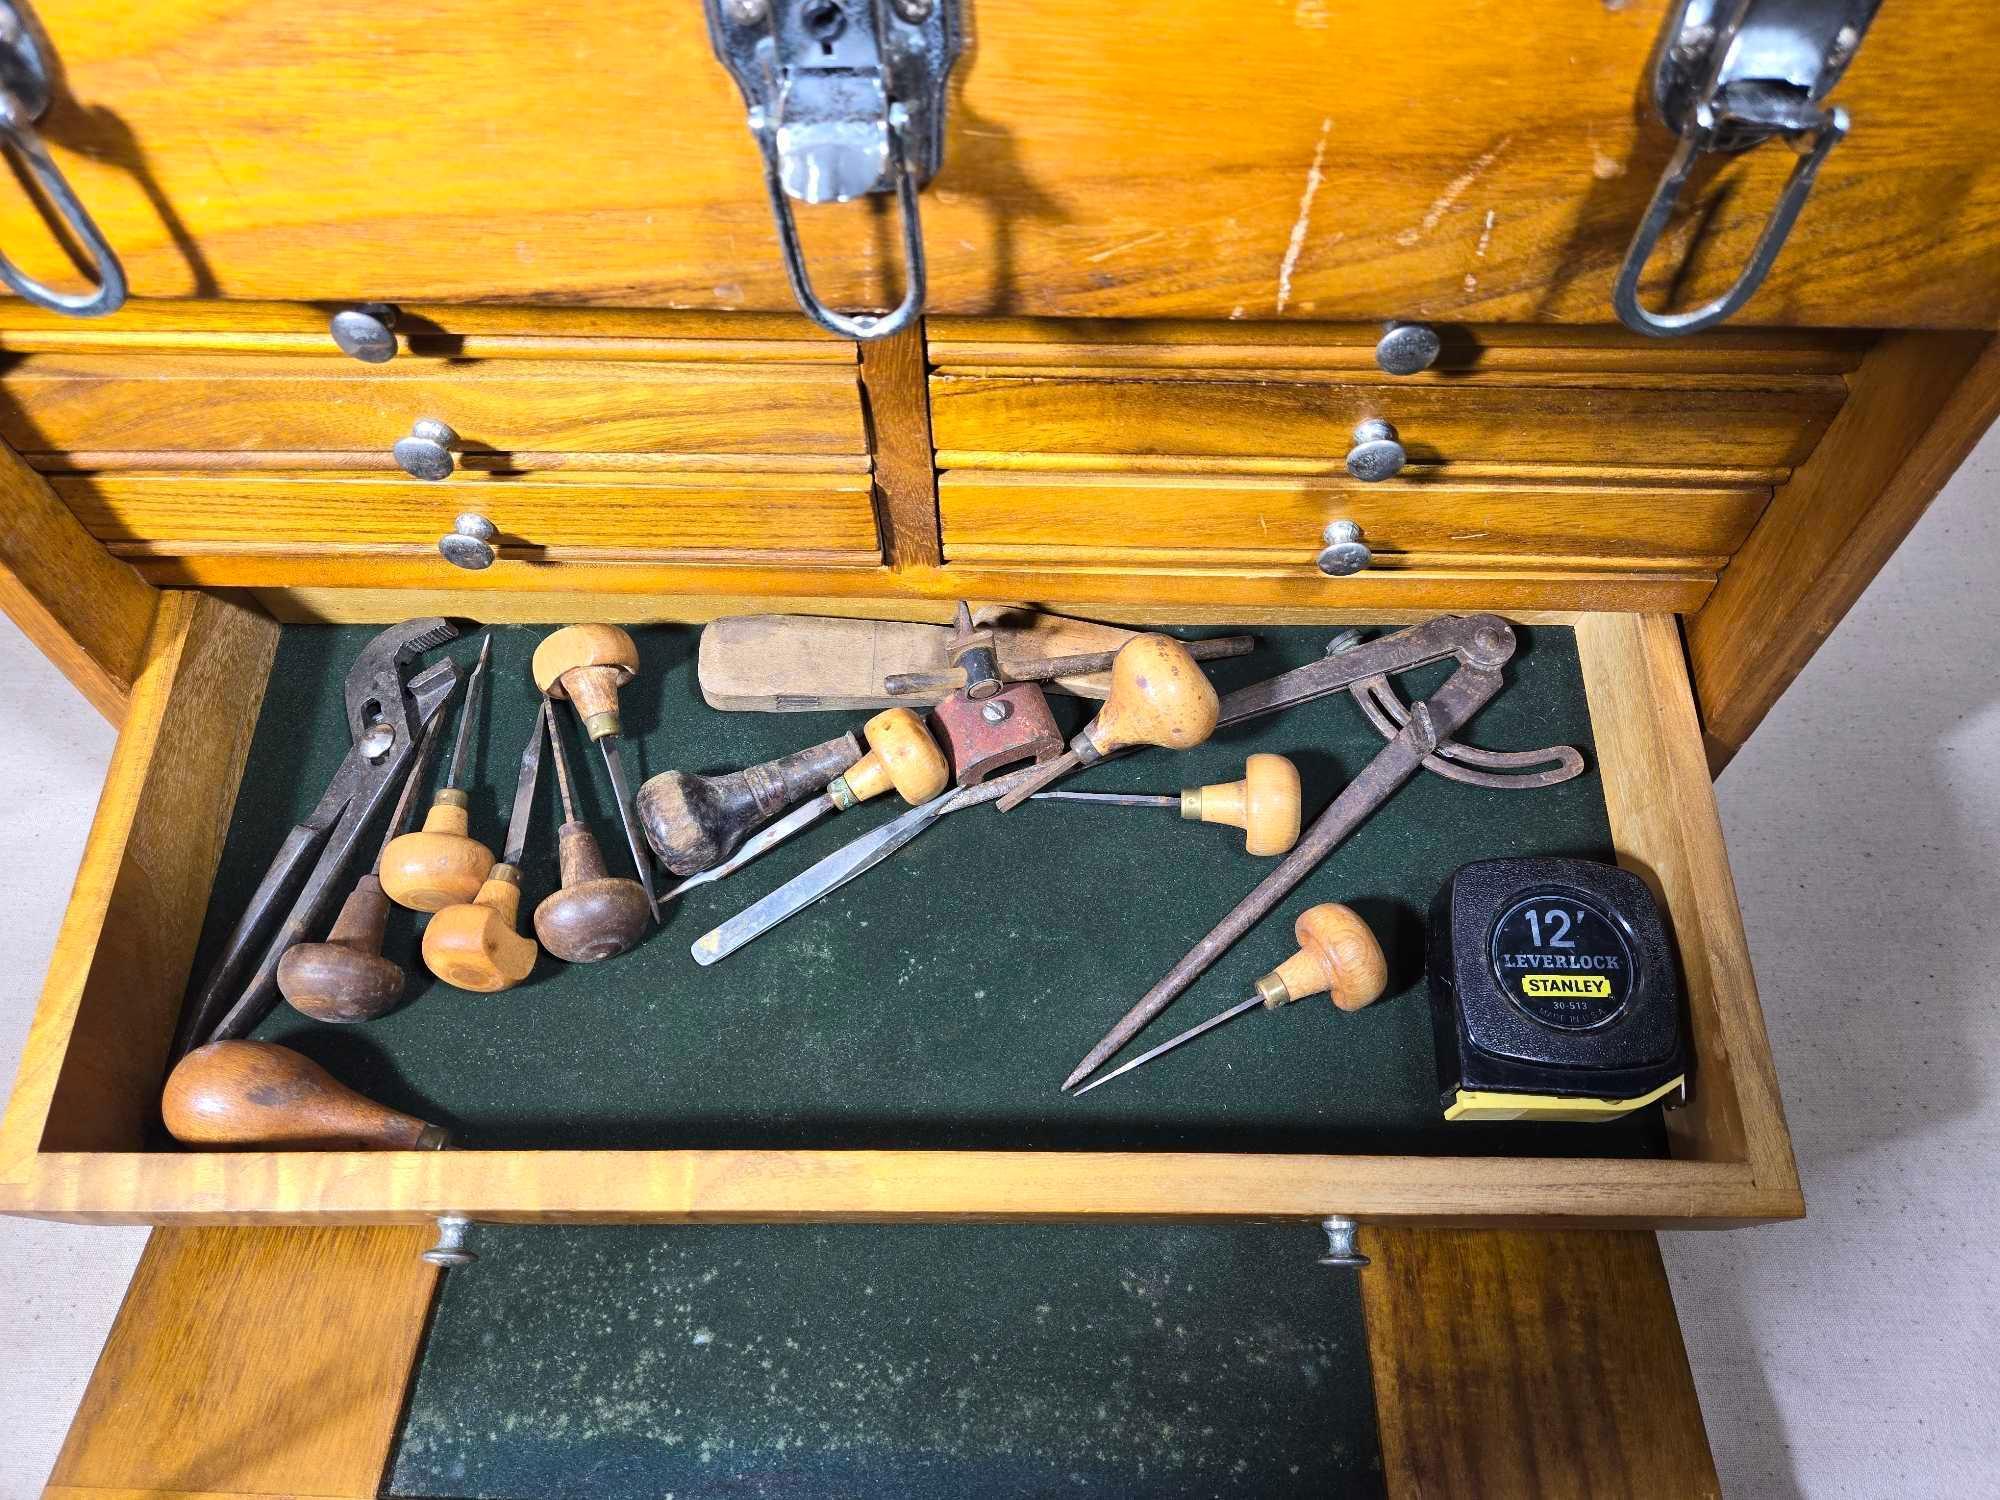 Machinist Tool Chest Full of Tools